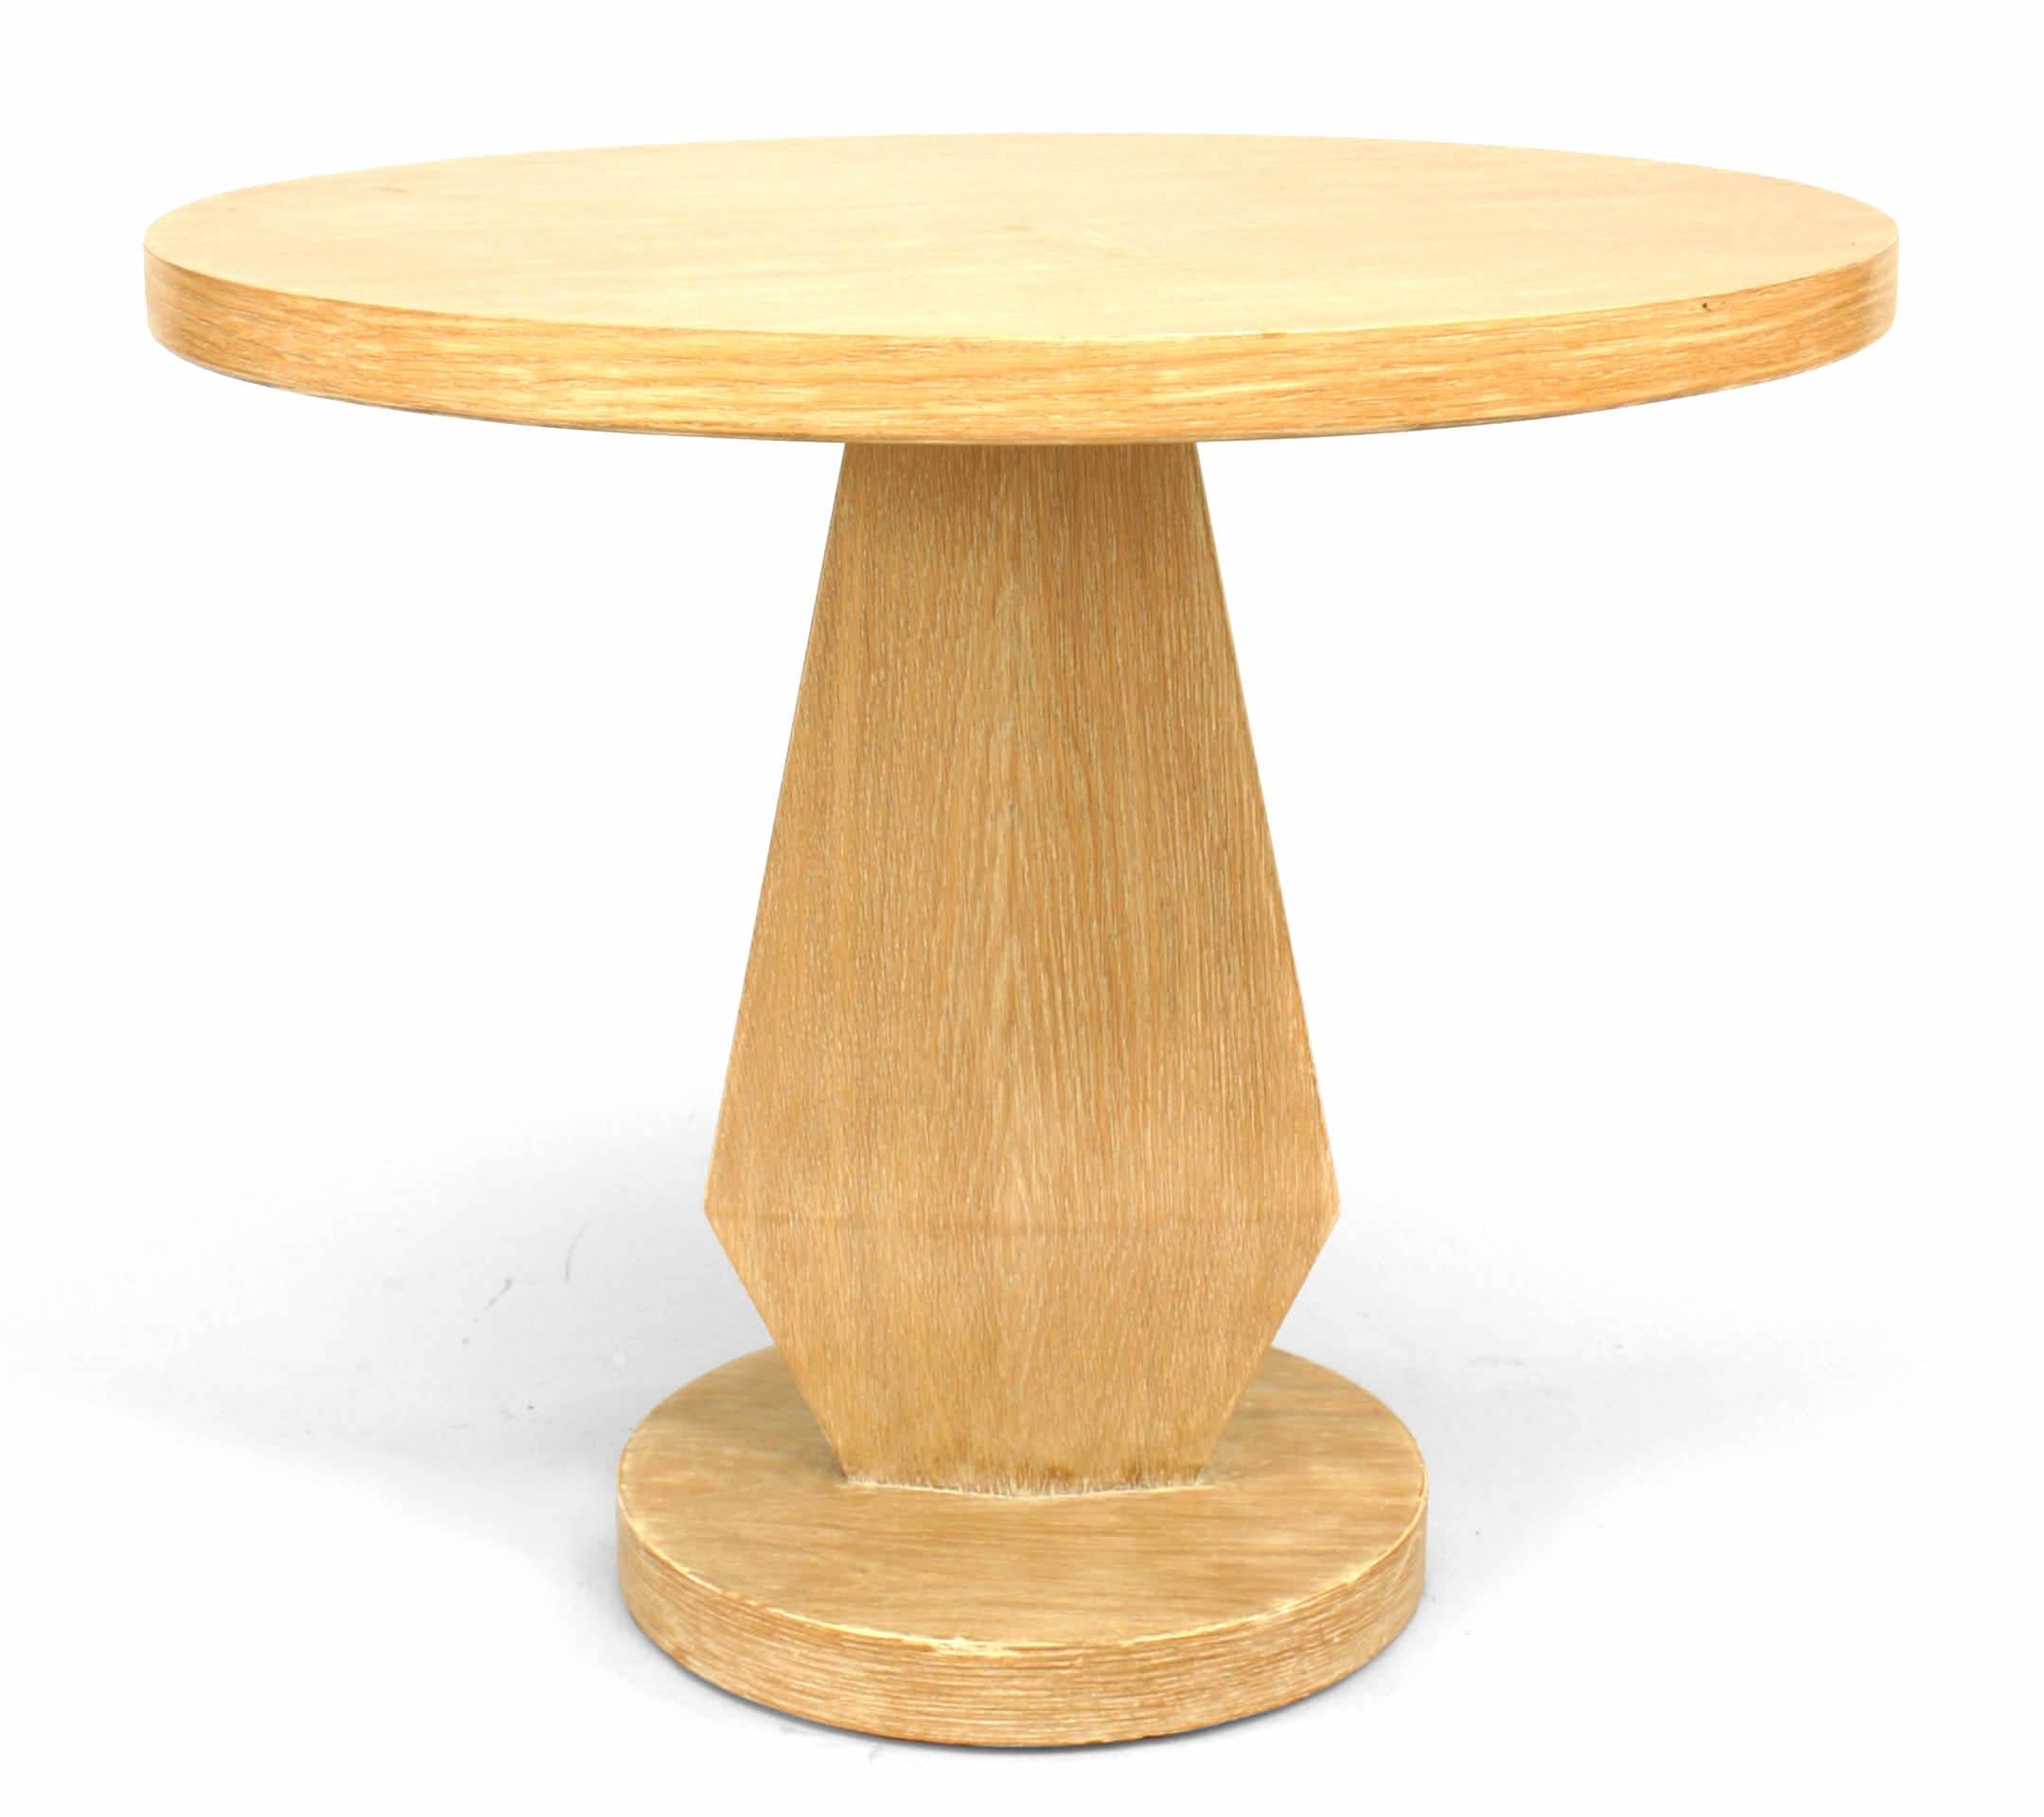 American Mid-Century (1950s) limewood round end table supported on a geometric shaped pedestal base.